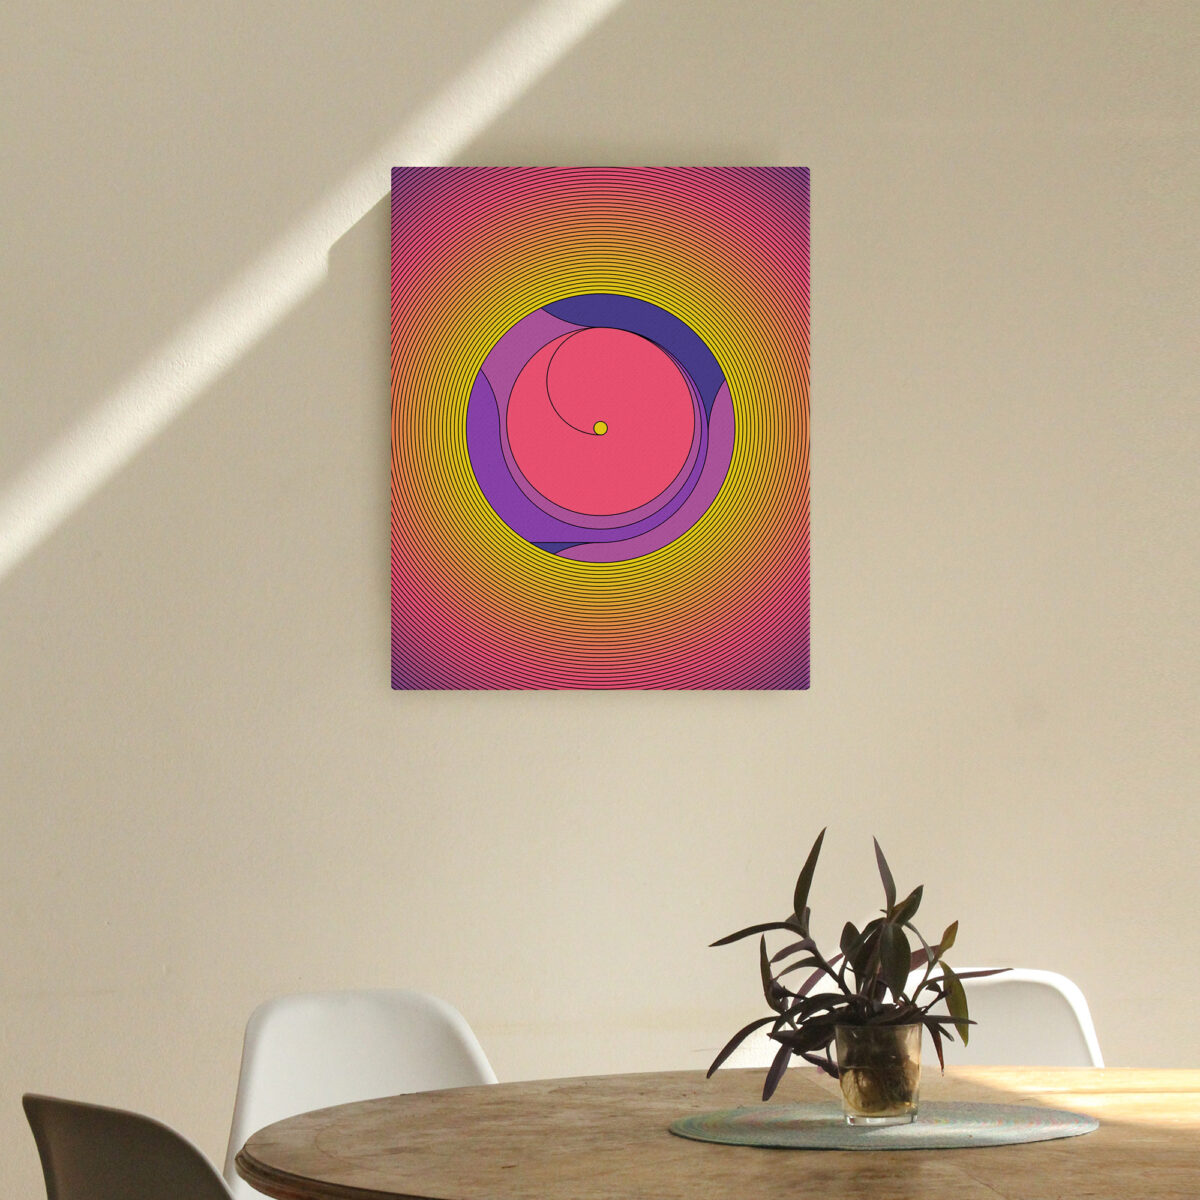 Omphalos canvas print hanging on a wall